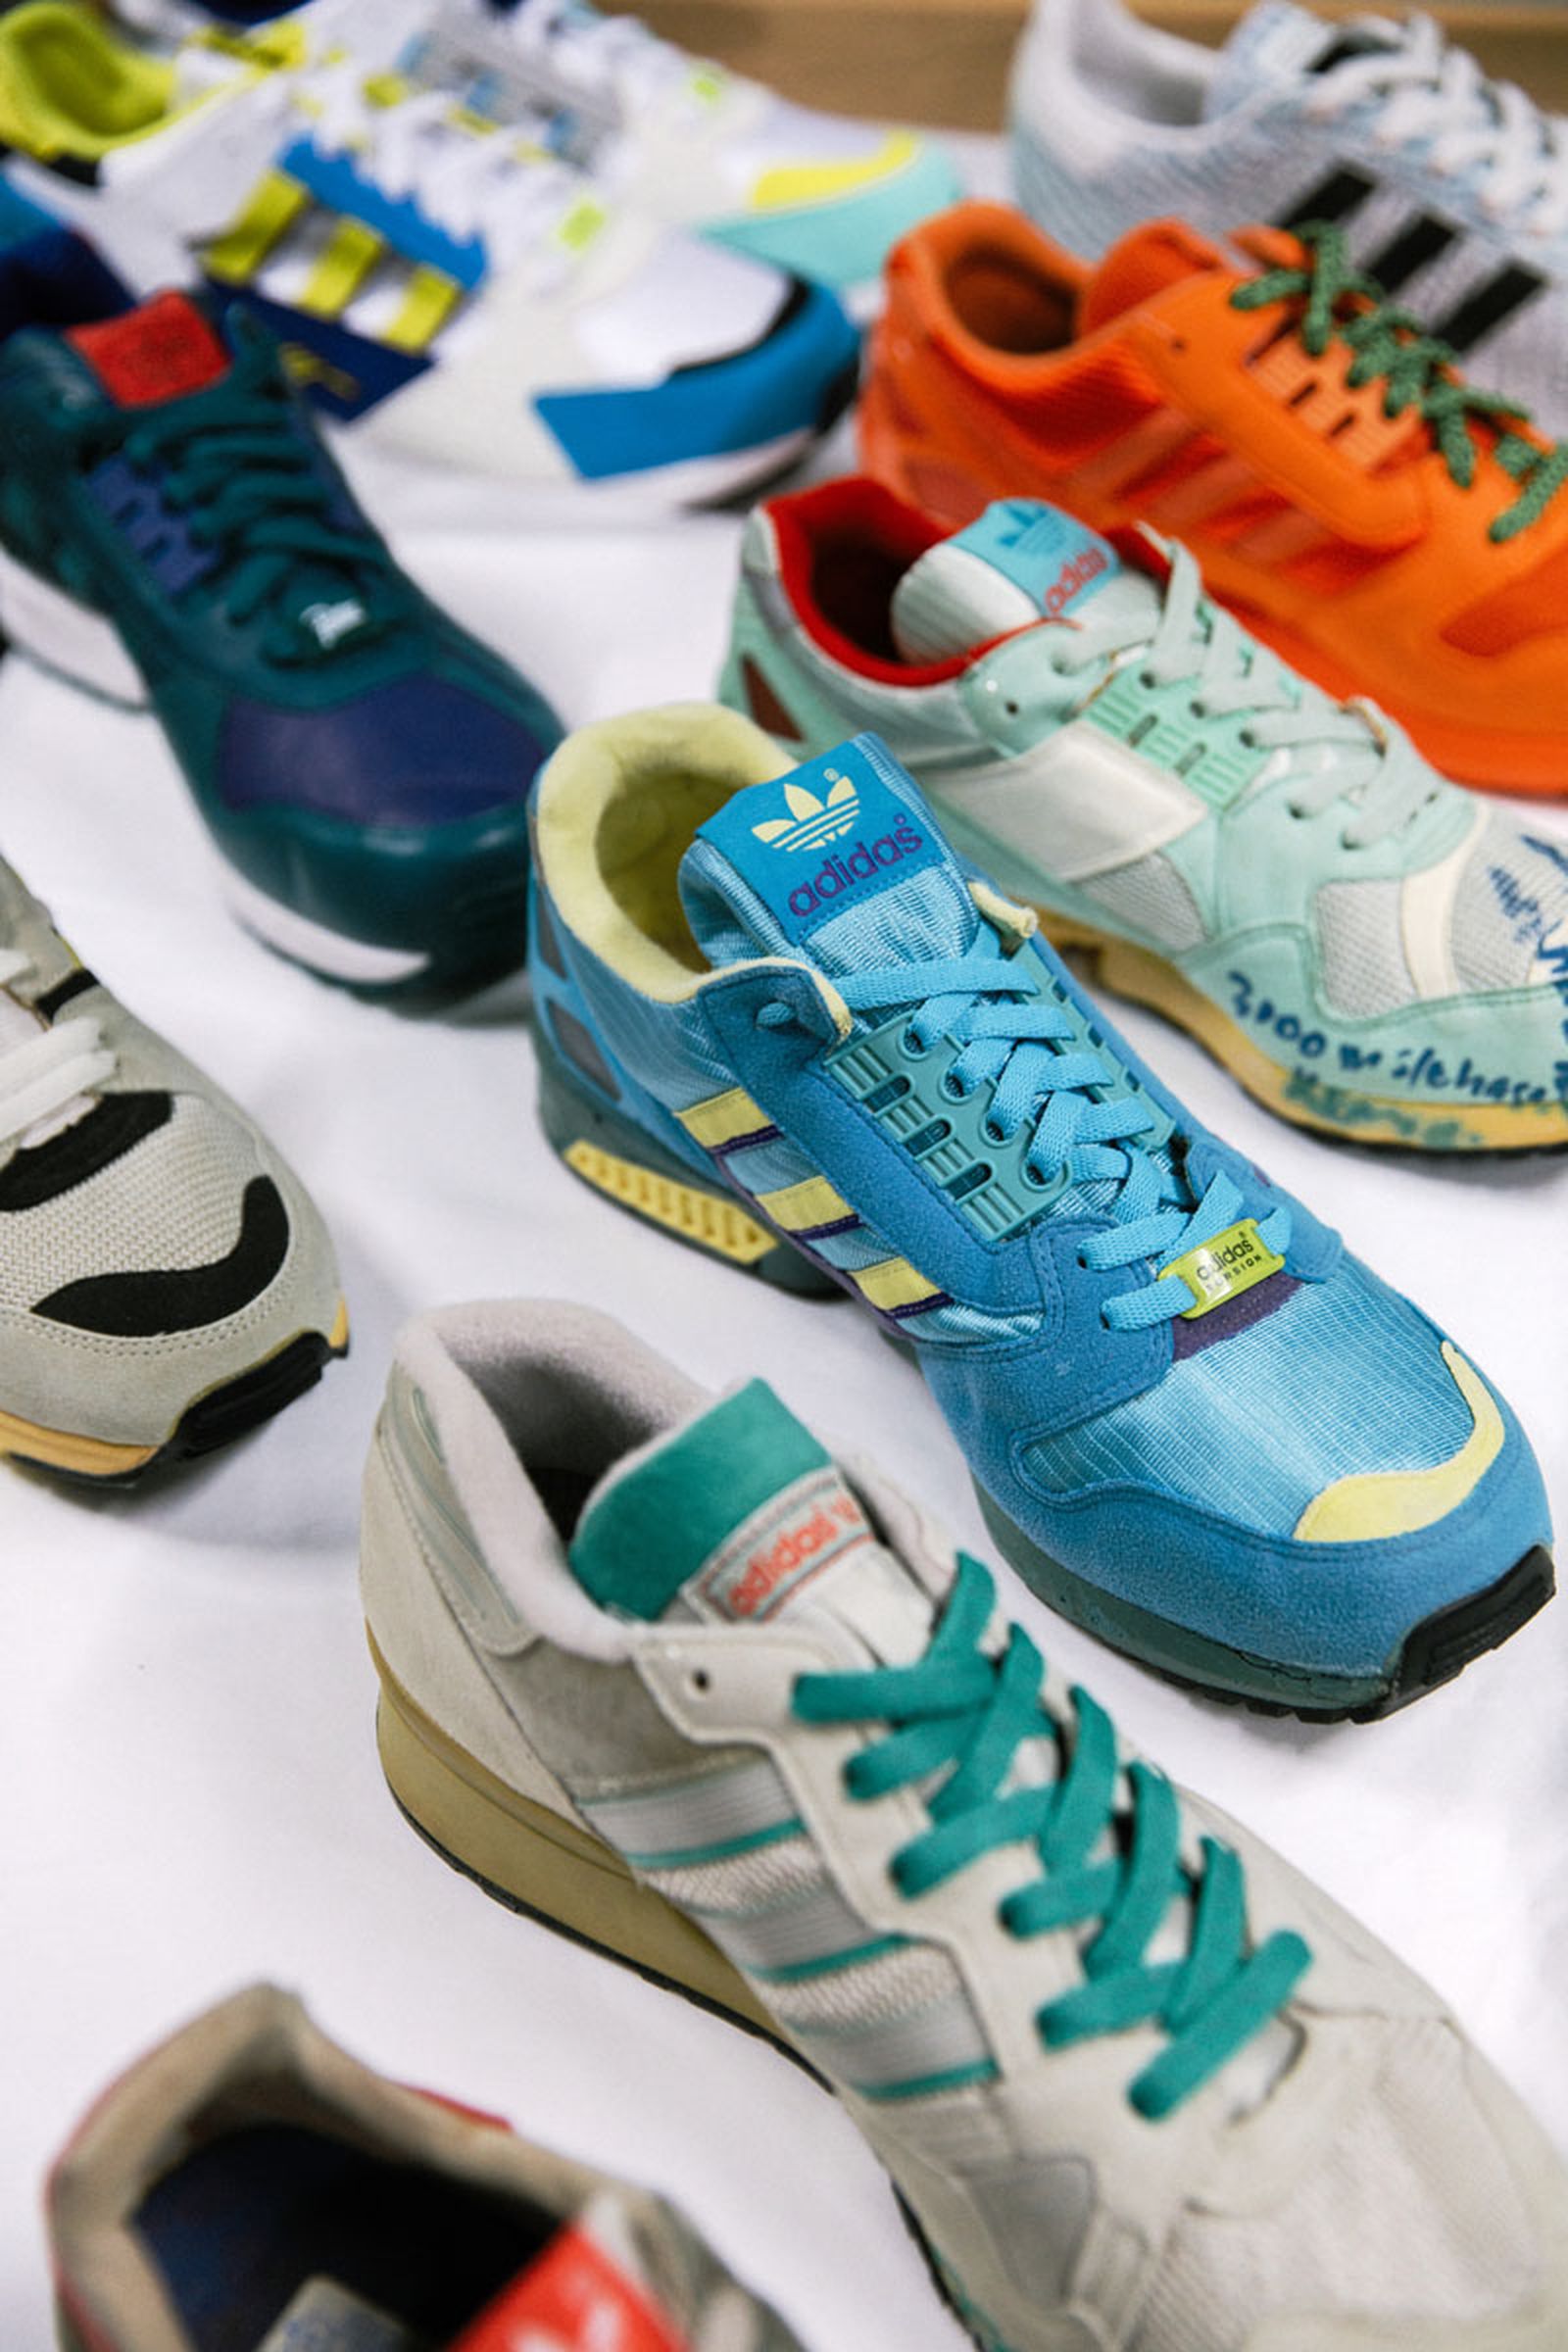 rely Descriptive report A Brief History of the adidas ZX: Innovation, Collabs & Raves